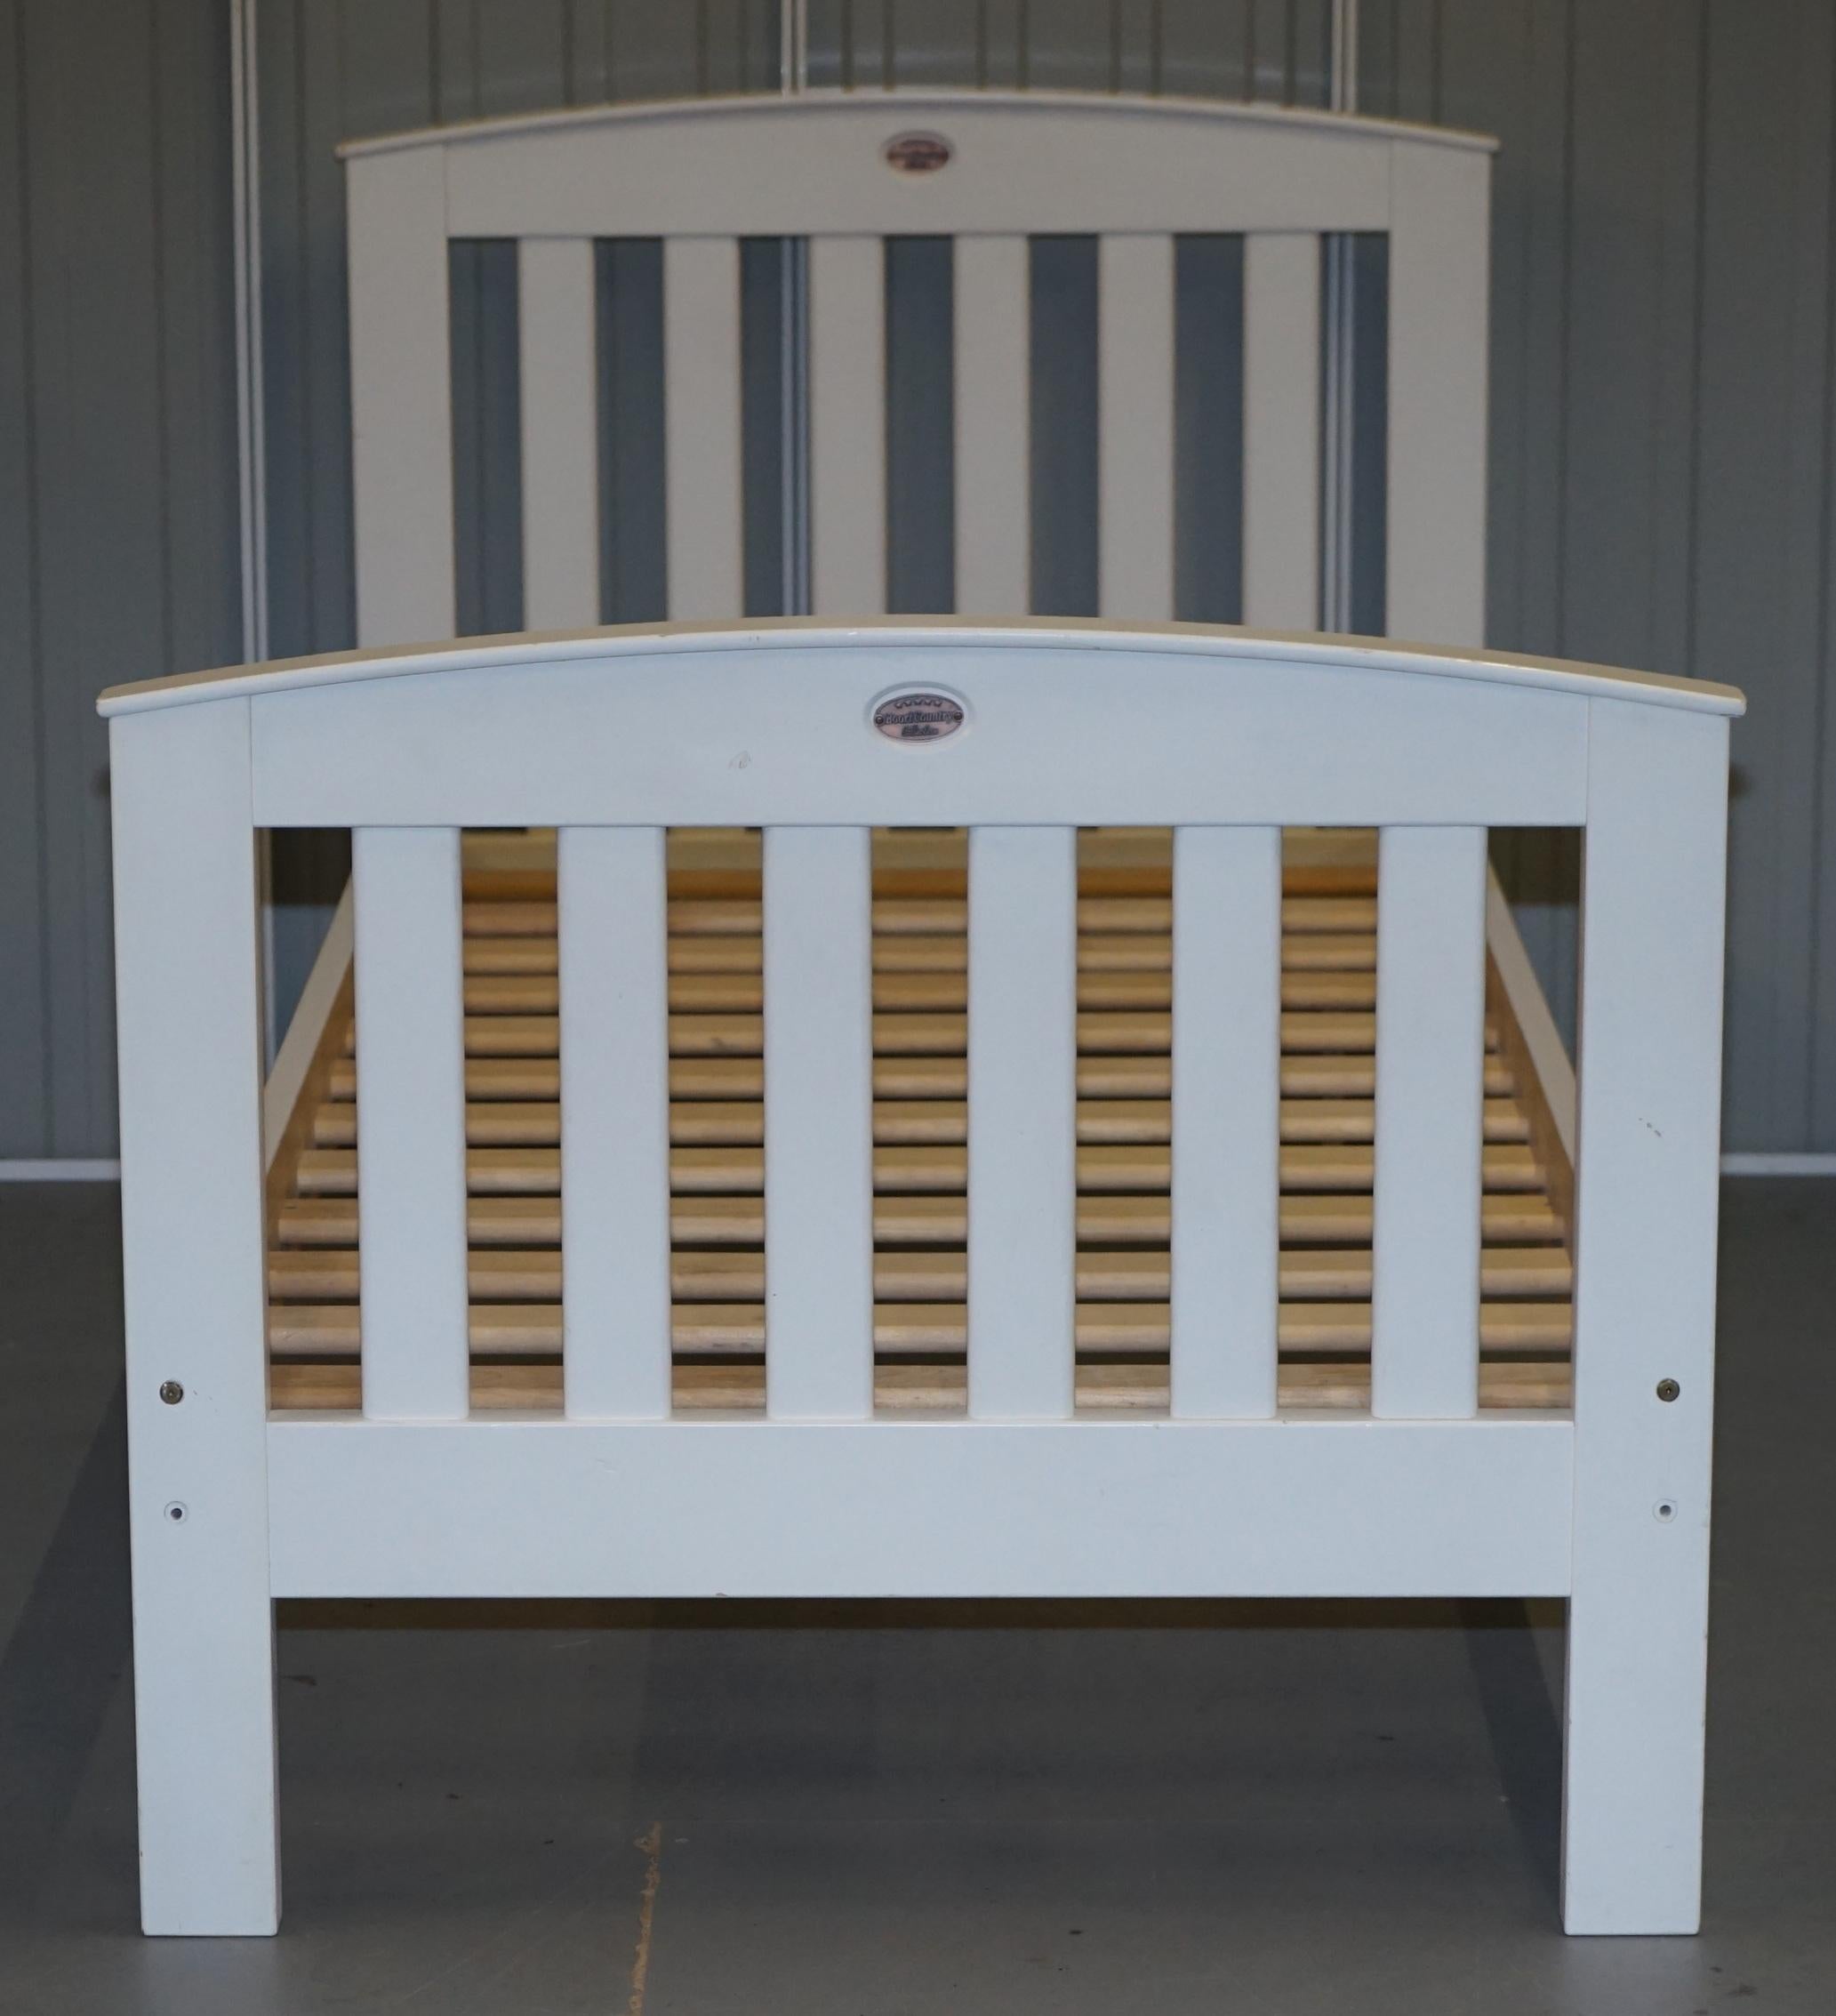 We are delighted to offer for sale this original Boori Country Collection white painted bed frame

A well made and good looking bed frame, its unisex being a simple white, all solid pine, everything is complete and ready to go 

This auction